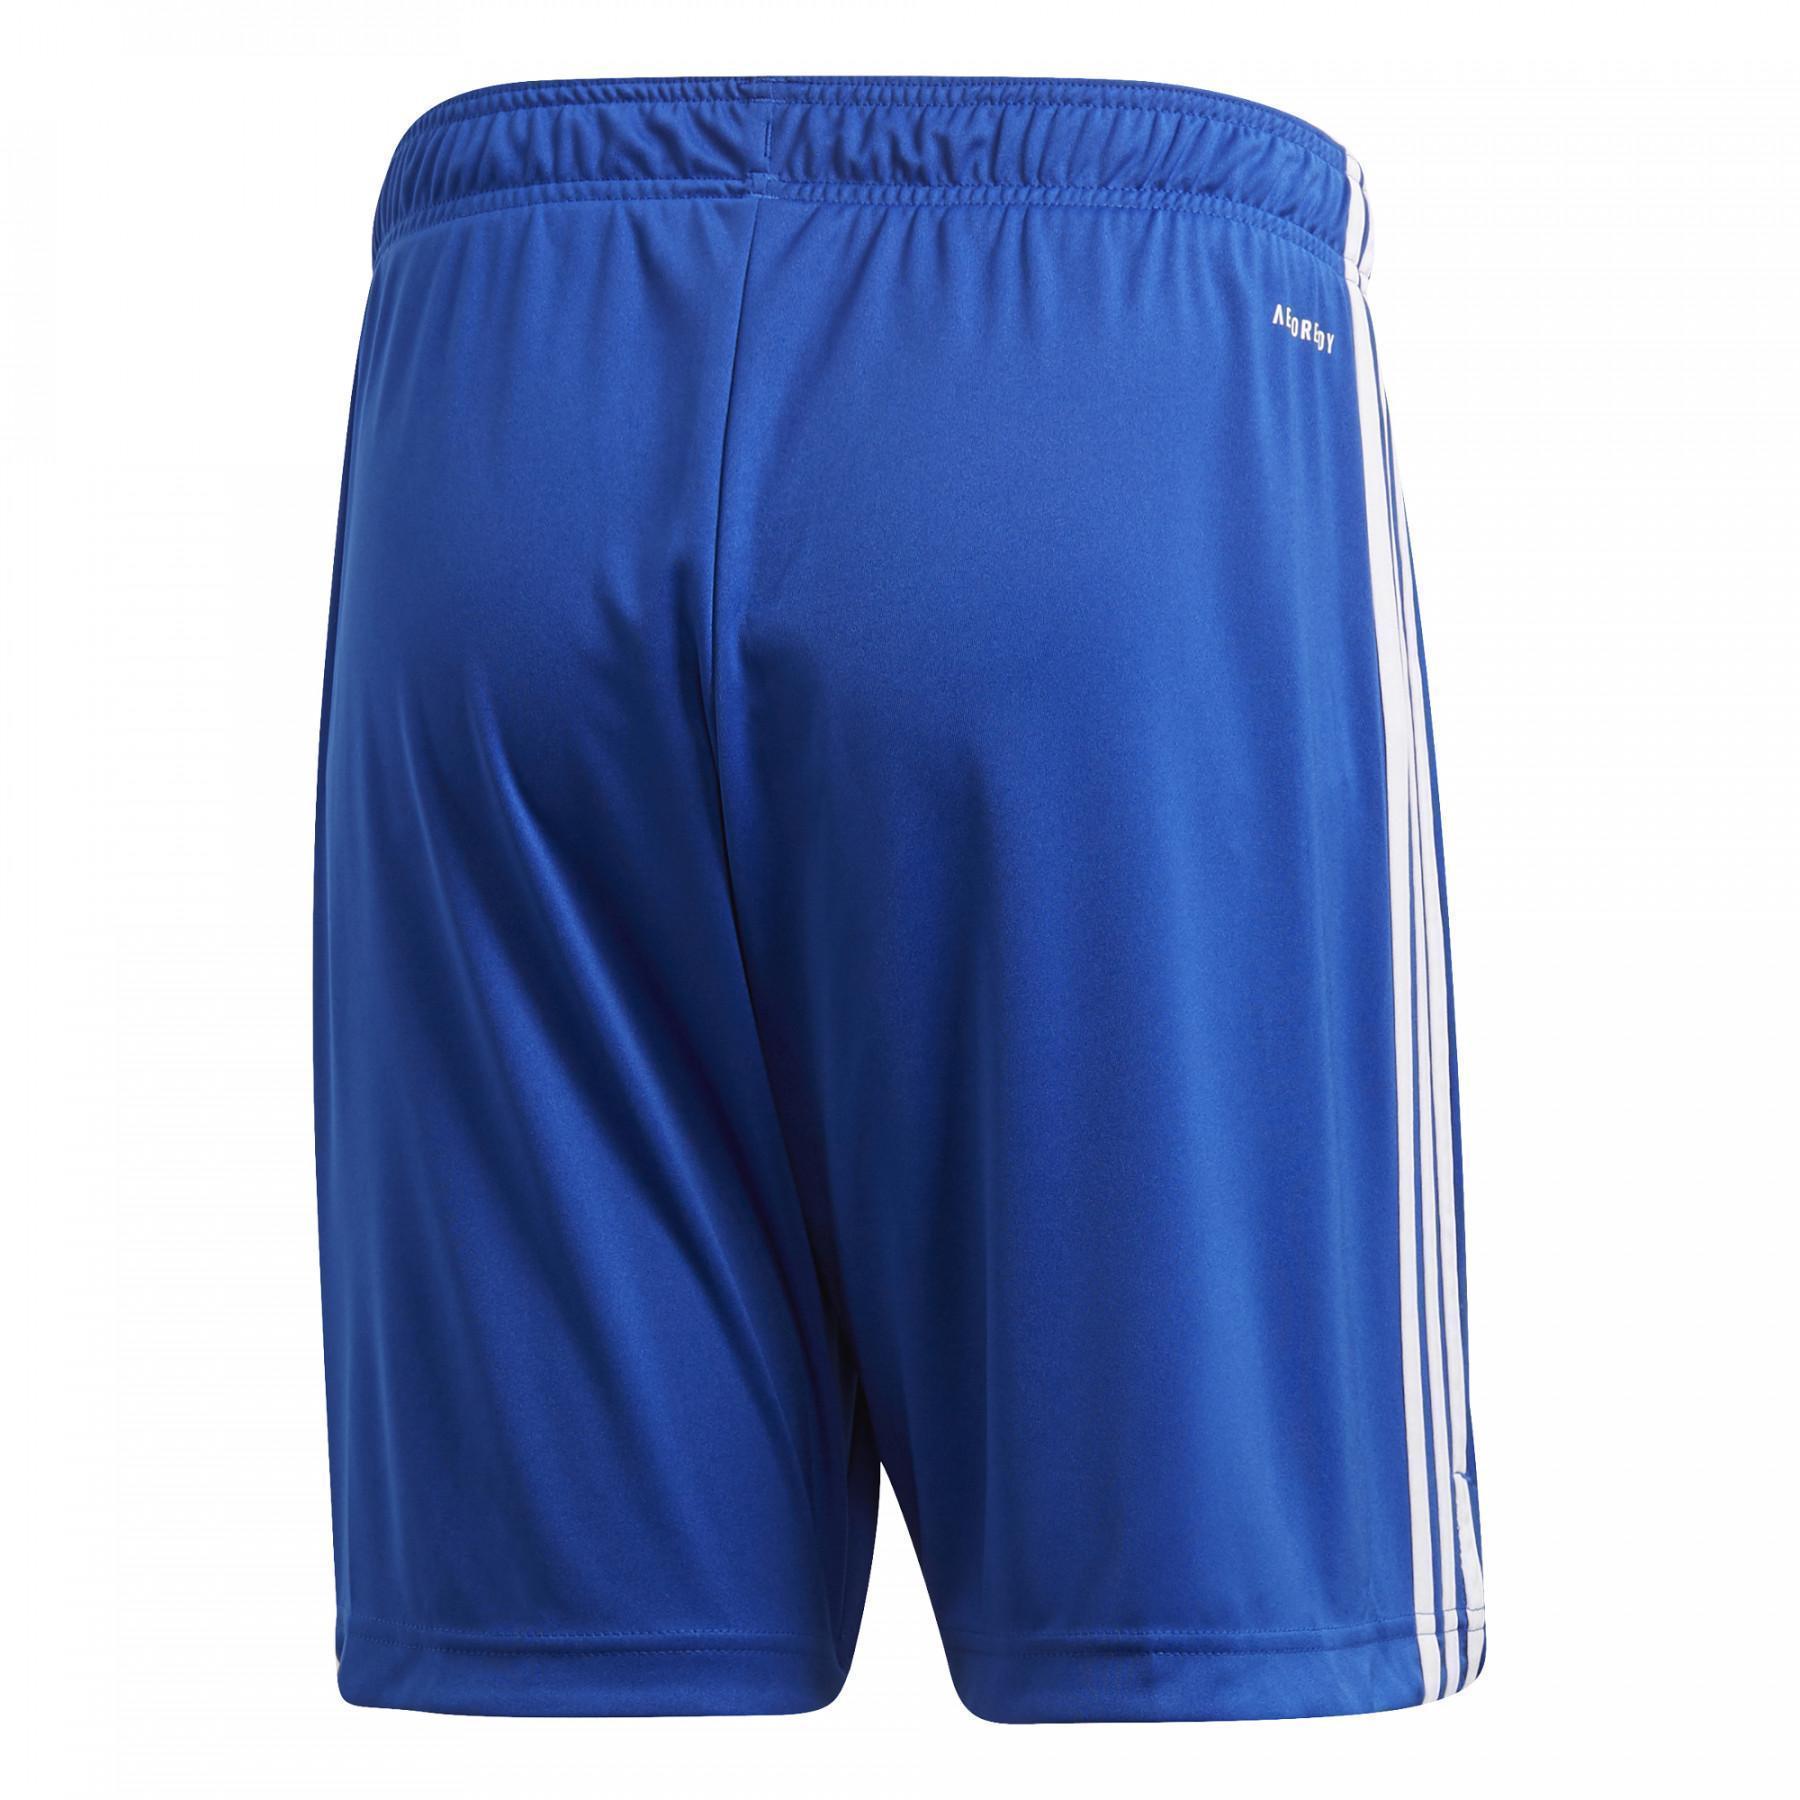 Outdoor shorts russia